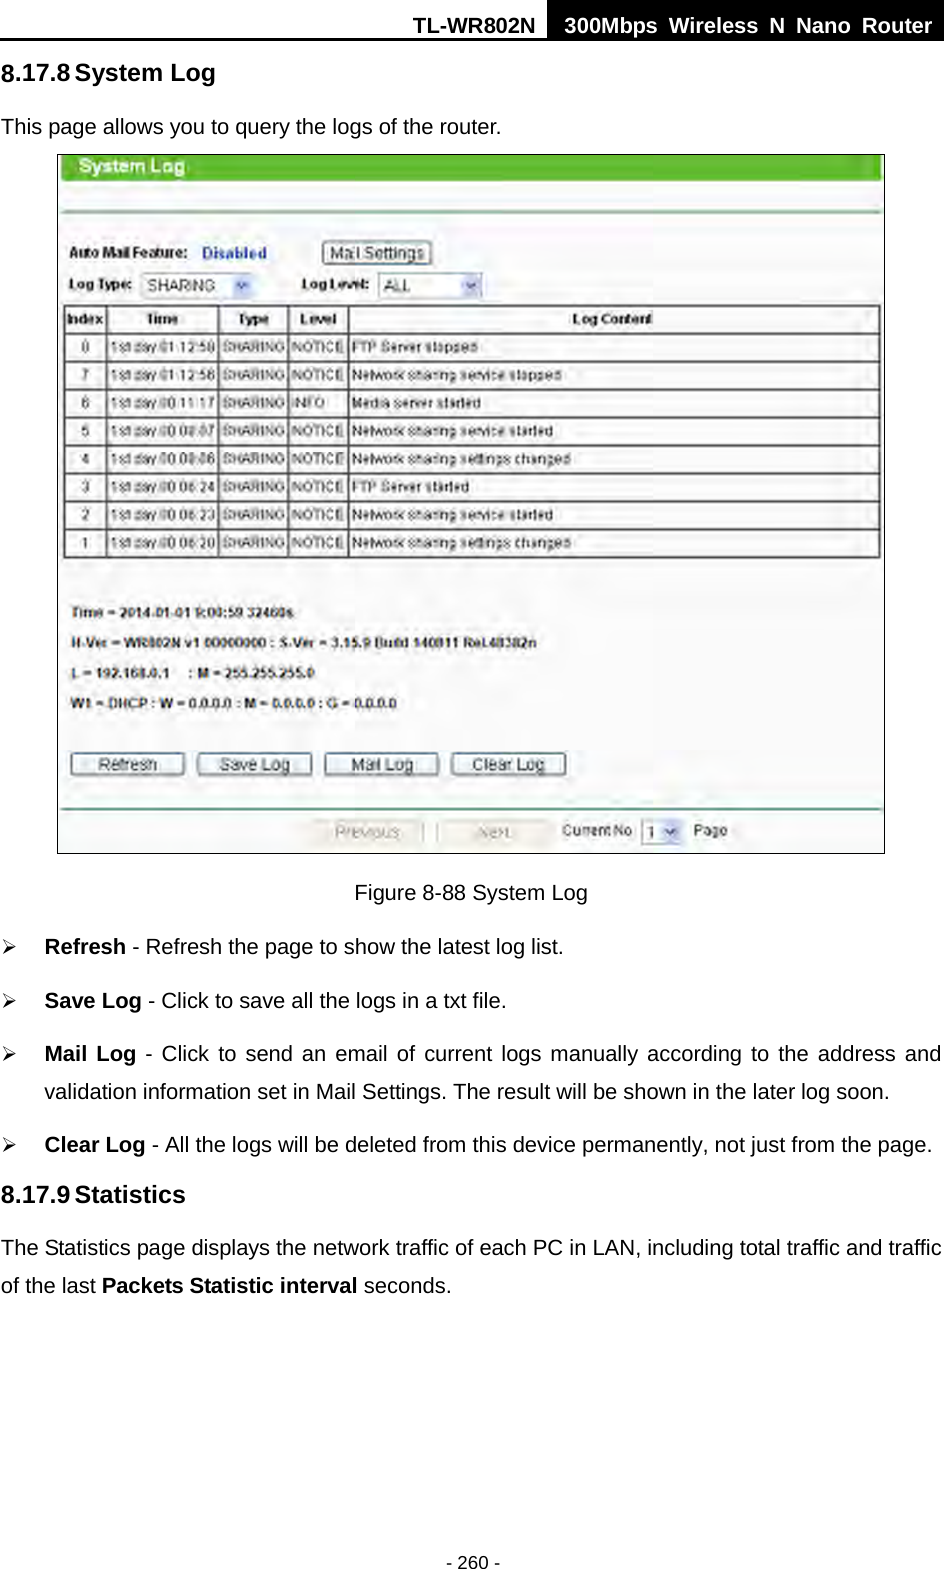 TL-WR802N  300Mbps Wireless N Nano Router  8.17.8 System Log This page allows you to query the logs of the router.  Figure 8-88 System Log  Refresh - Refresh the page to show the latest log list.  Save Log - Click to save all the logs in a txt file.  Mail Log - Click to send an email of current logs manually according to the address and validation information set in Mail Settings. The result will be shown in the later log soon.  Clear Log - All the logs will be deleted from this device permanently, not just from the page. 8.17.9 Statistics The Statistics page displays the network traffic of each PC in LAN, including total traffic and traffic of the last Packets Statistic interval seconds. - 260 - 